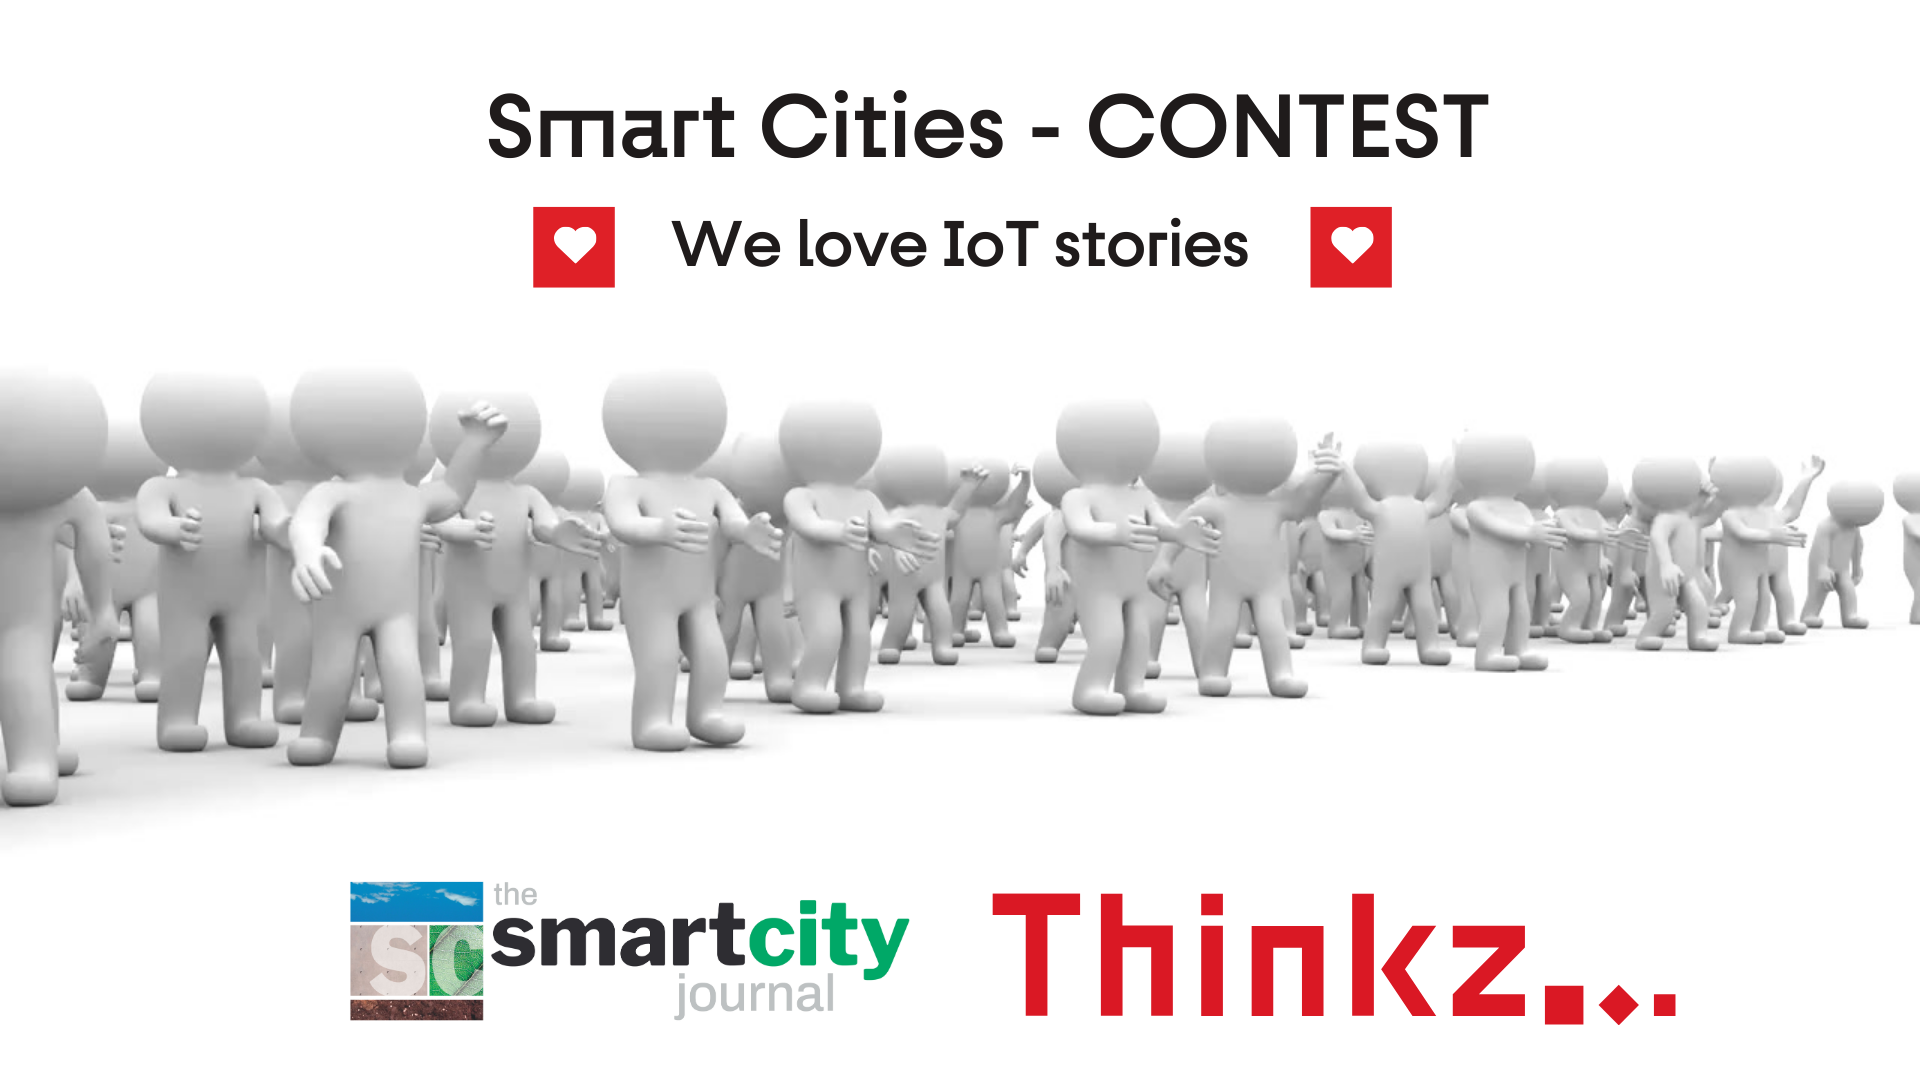 Thinkz and Smart City Journal Contest for smart cities